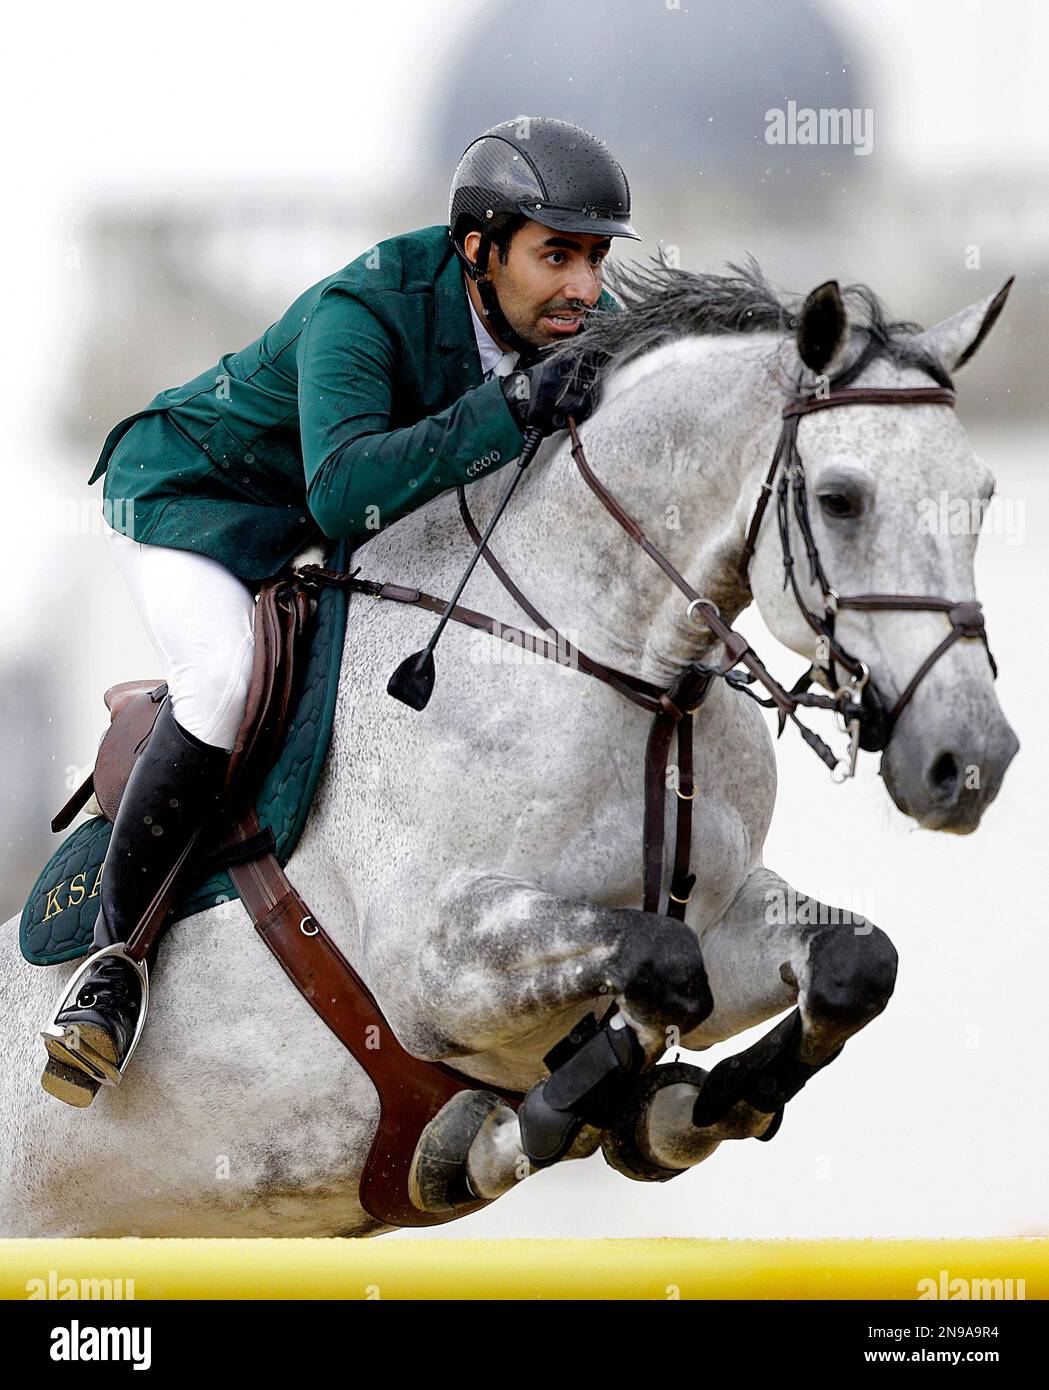 Prince Abdullah Al Saud, of Saudi Arabia, rides his horse Davos in the equestrian show jumping team competition at the 2012 Summer Olympics, Sunday, Aug